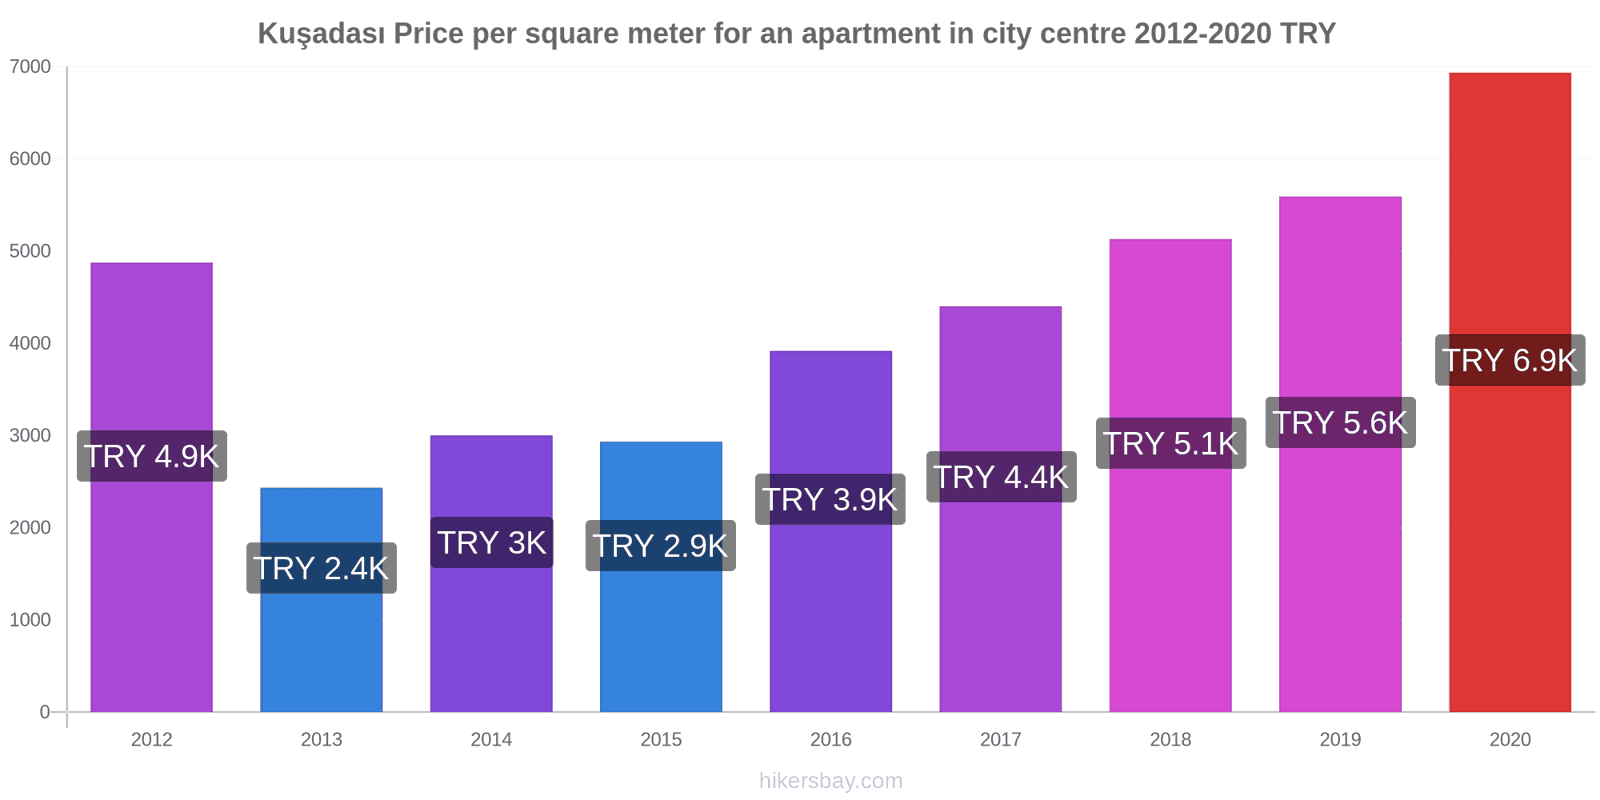 Kuşadası price changes Price per square meter for an apartment in city centre hikersbay.com